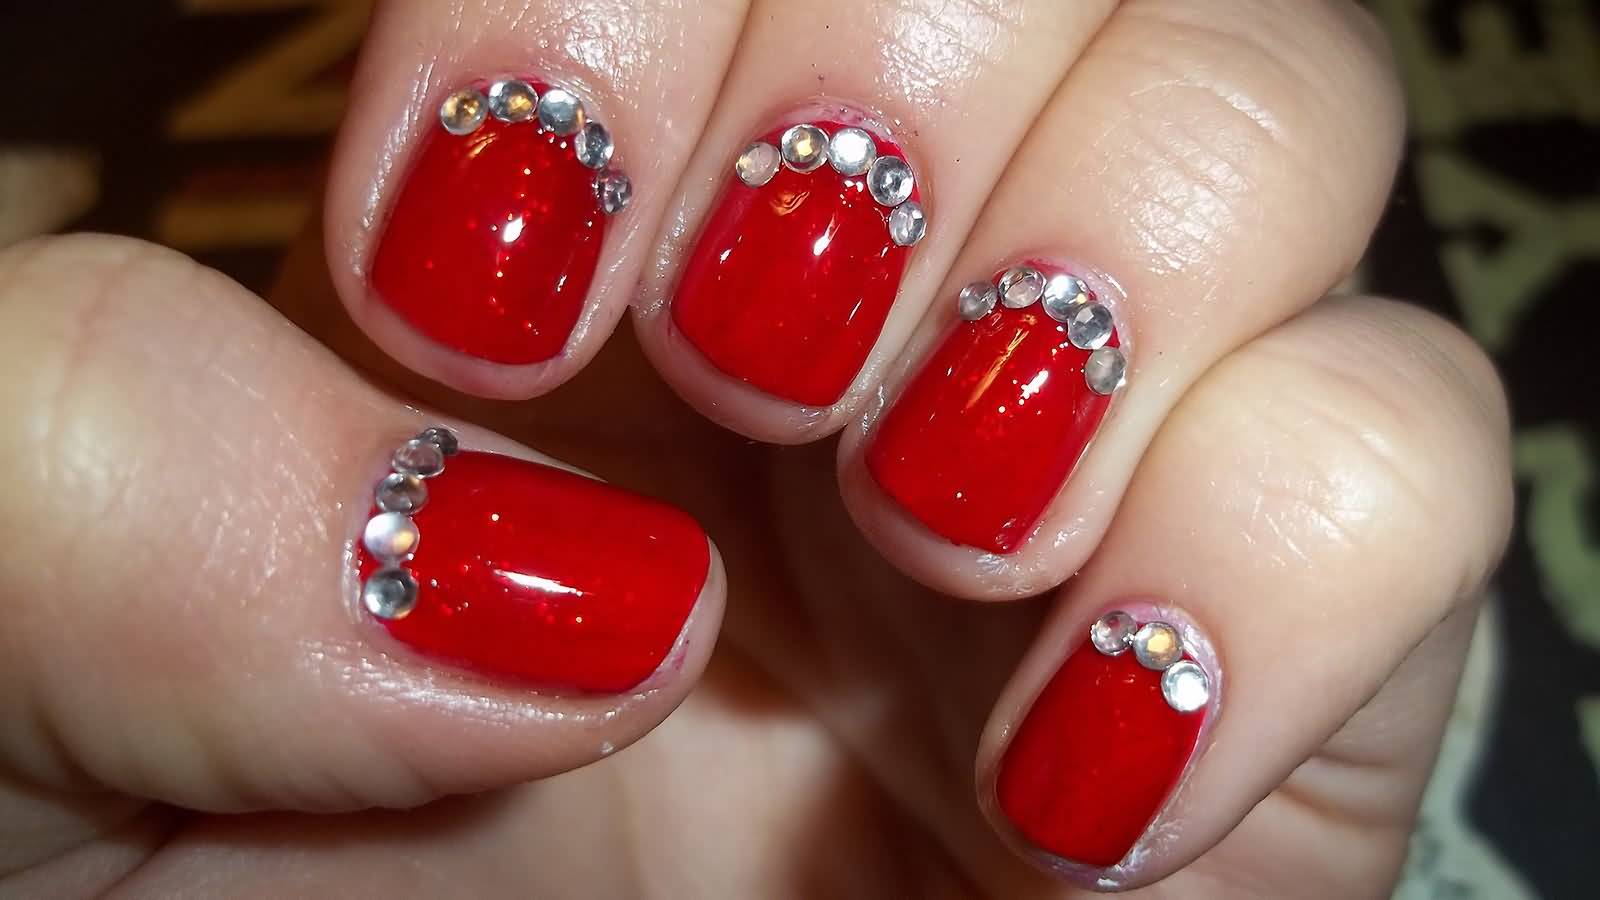 52 Incredible Red Nail Art Design Pictures